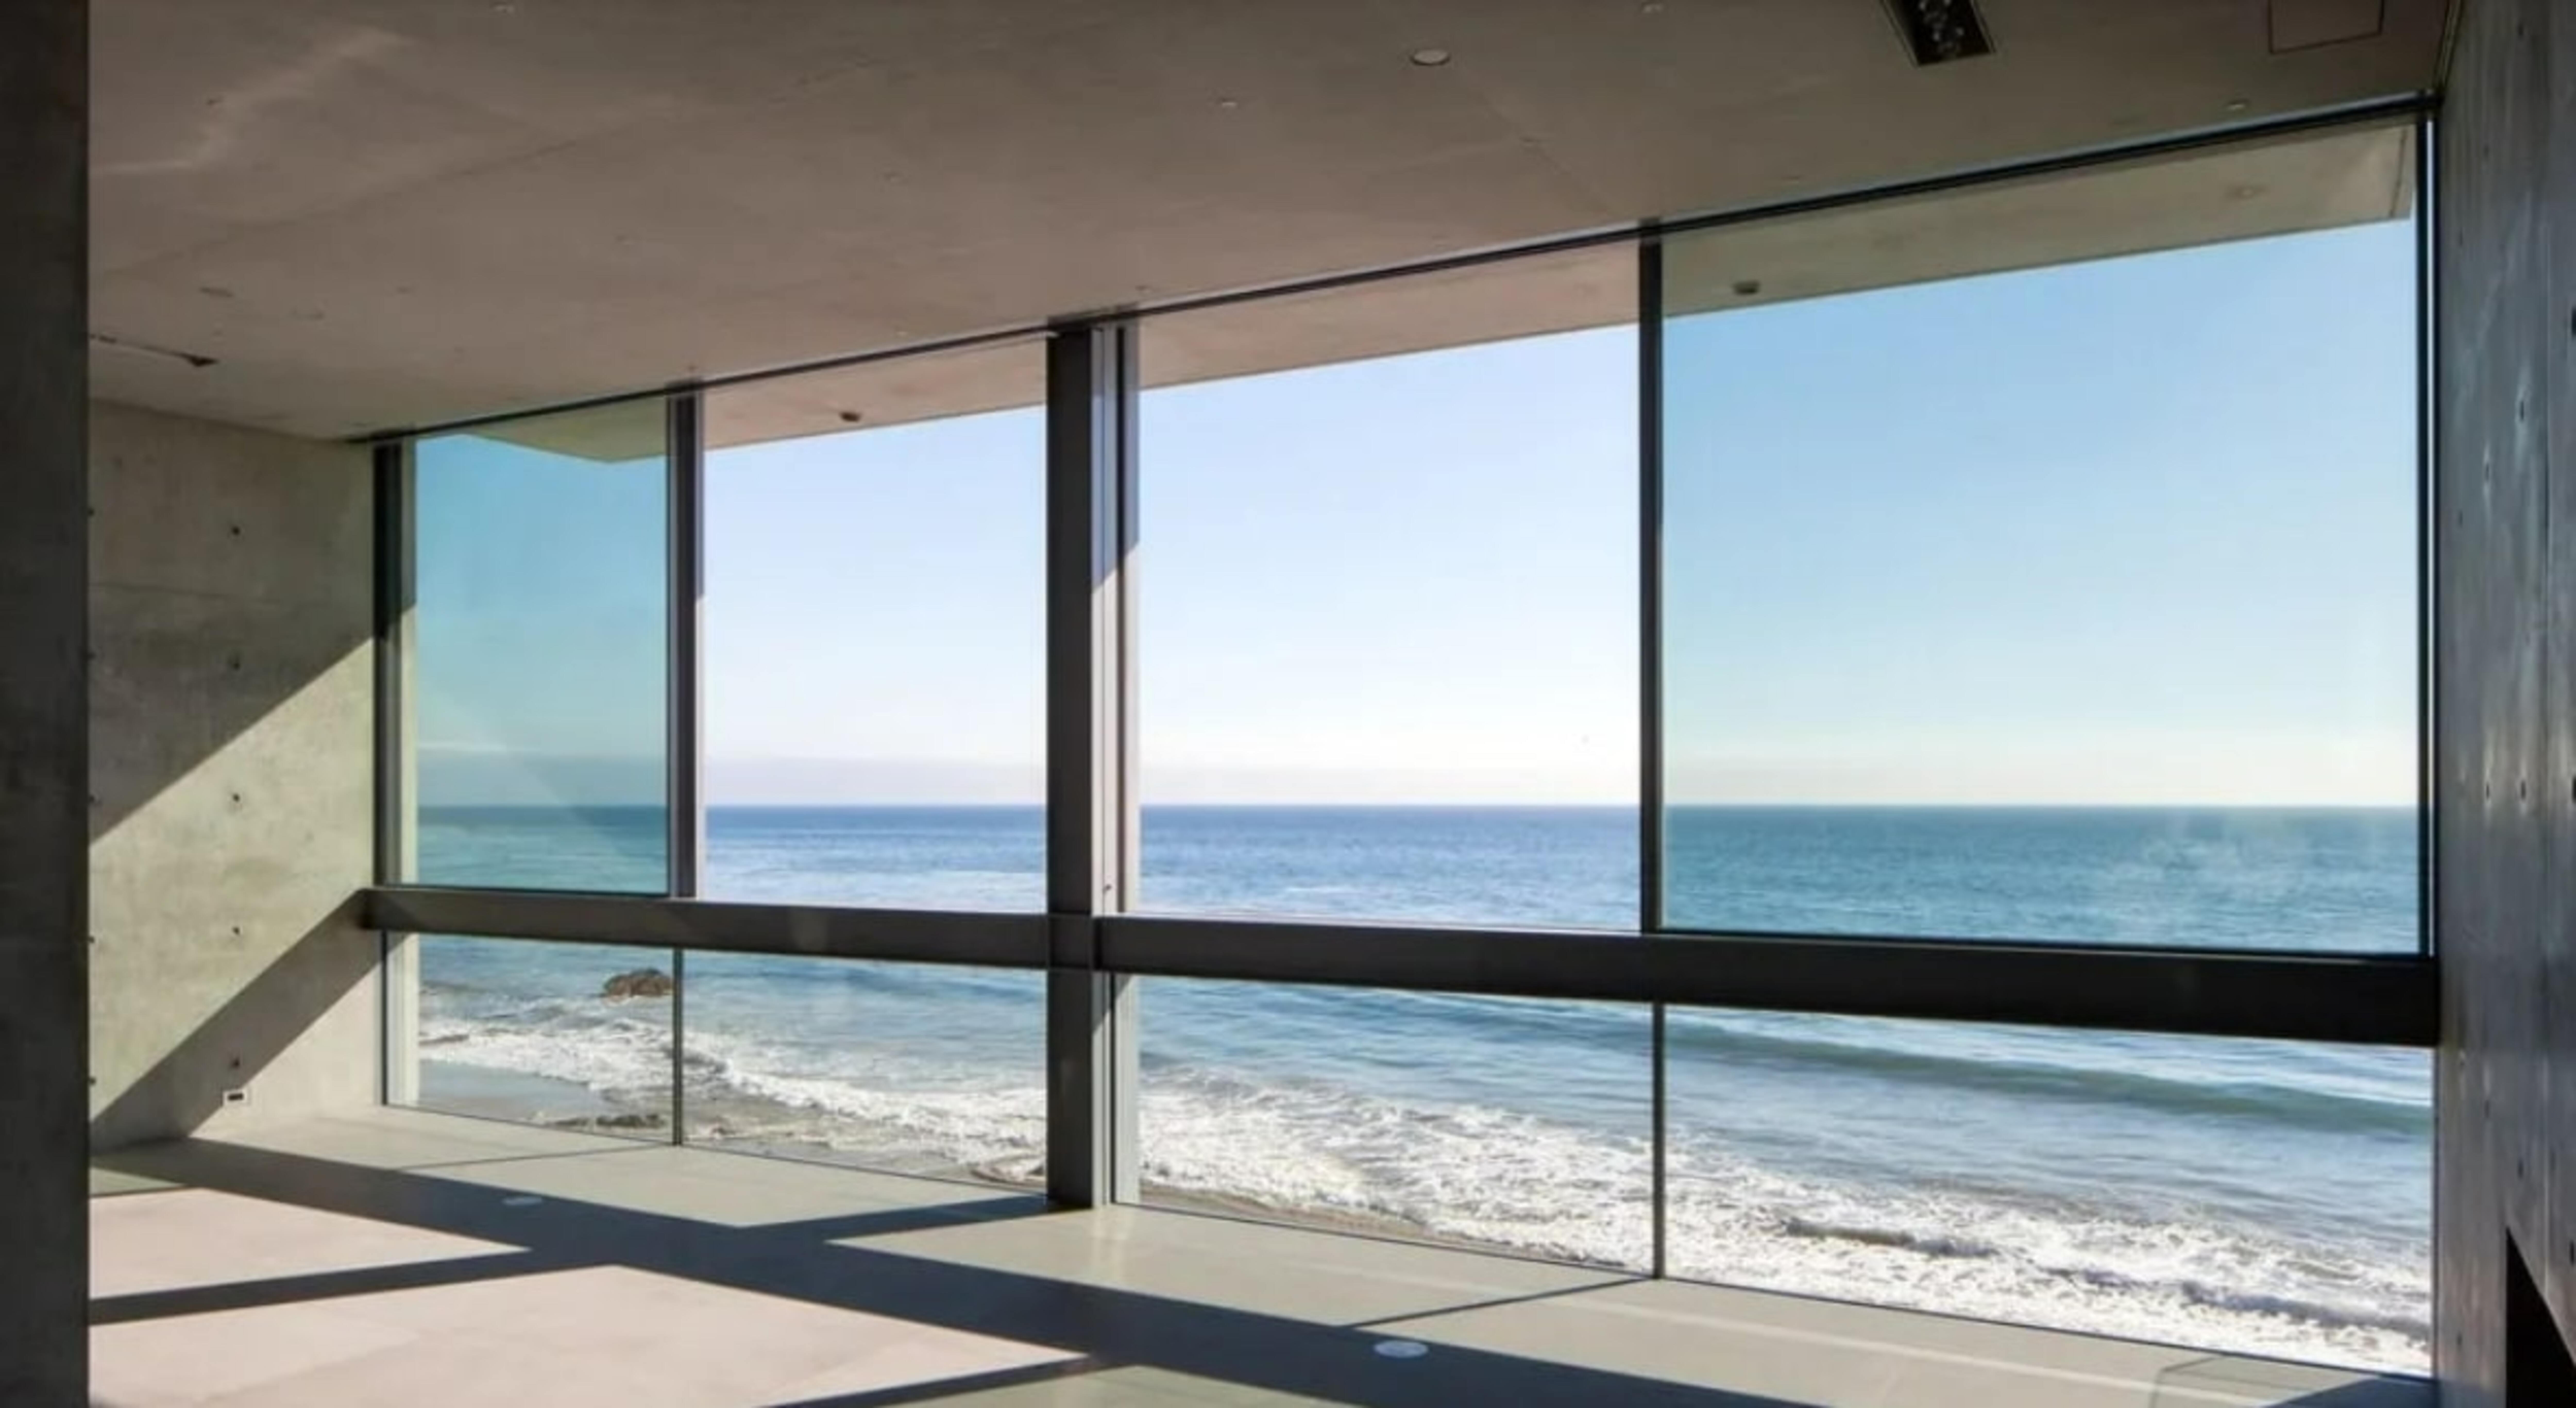 If the house was demolished, this is what the view would look like from the second floor with floor to ceiling windows